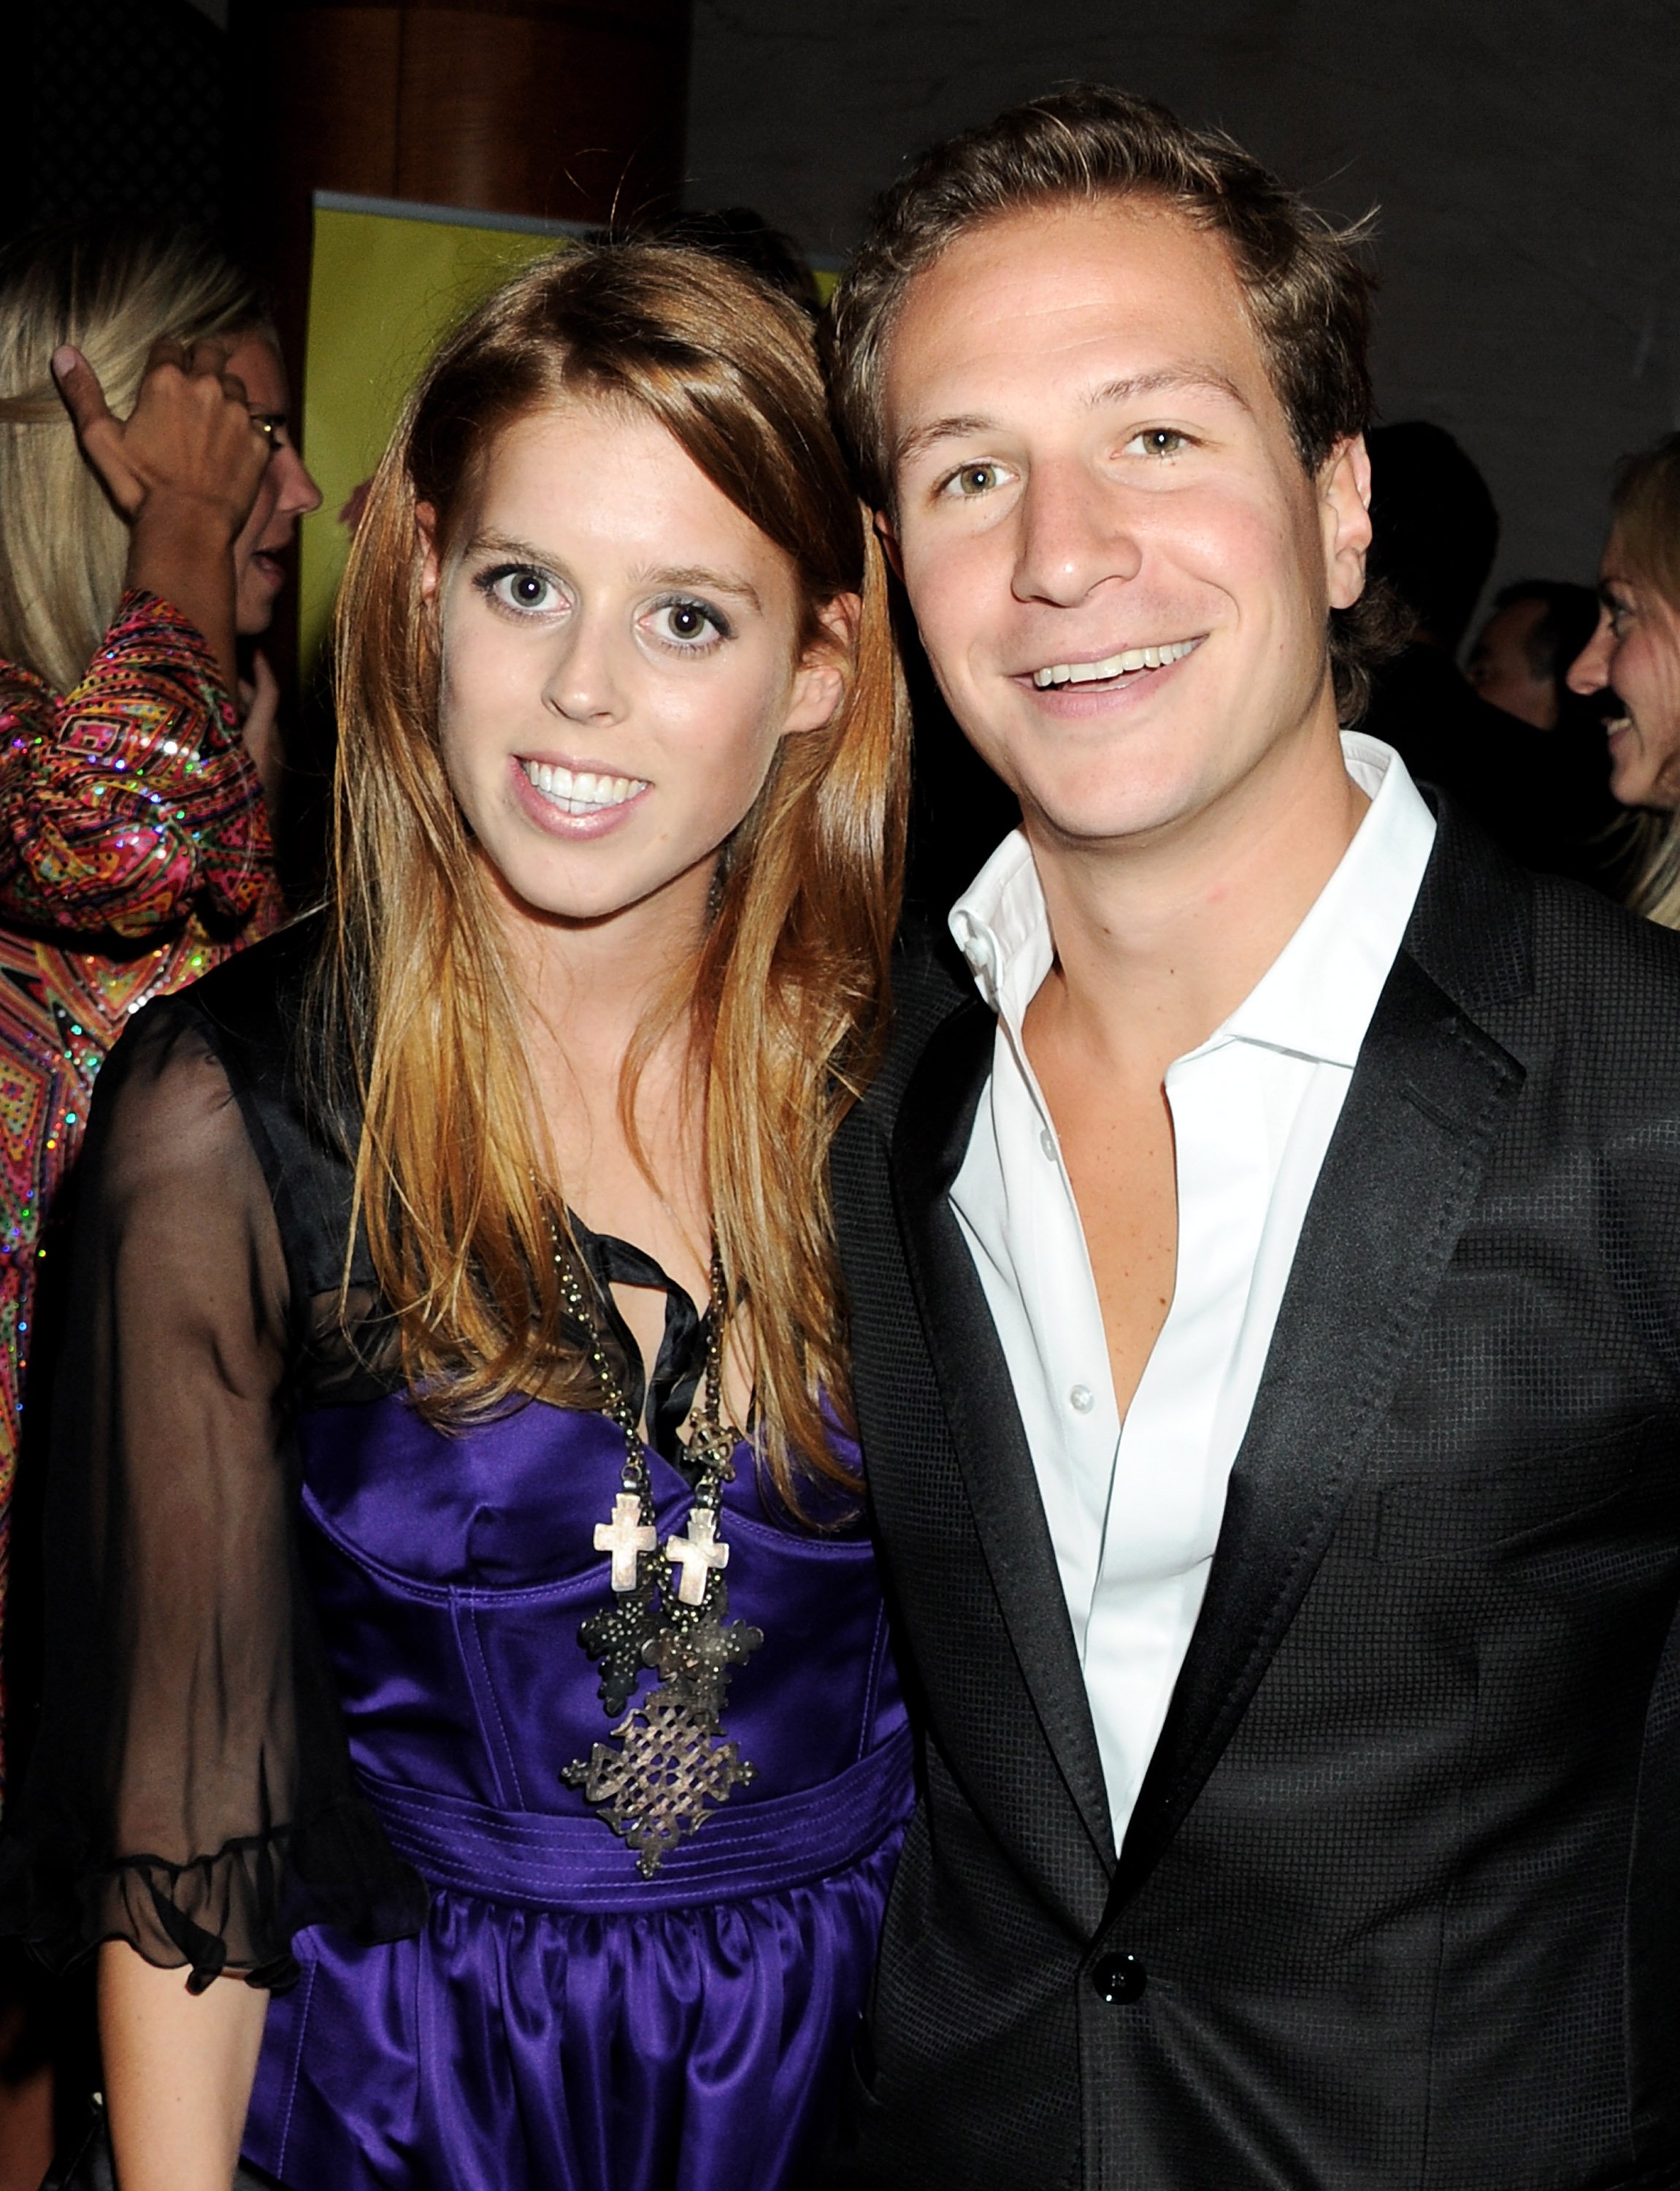 Princess Beatrice and Dave Clark, who Prince William didn't like, pose for photo together at Freddie For A Day event to celebrate the late Freddie Mercury